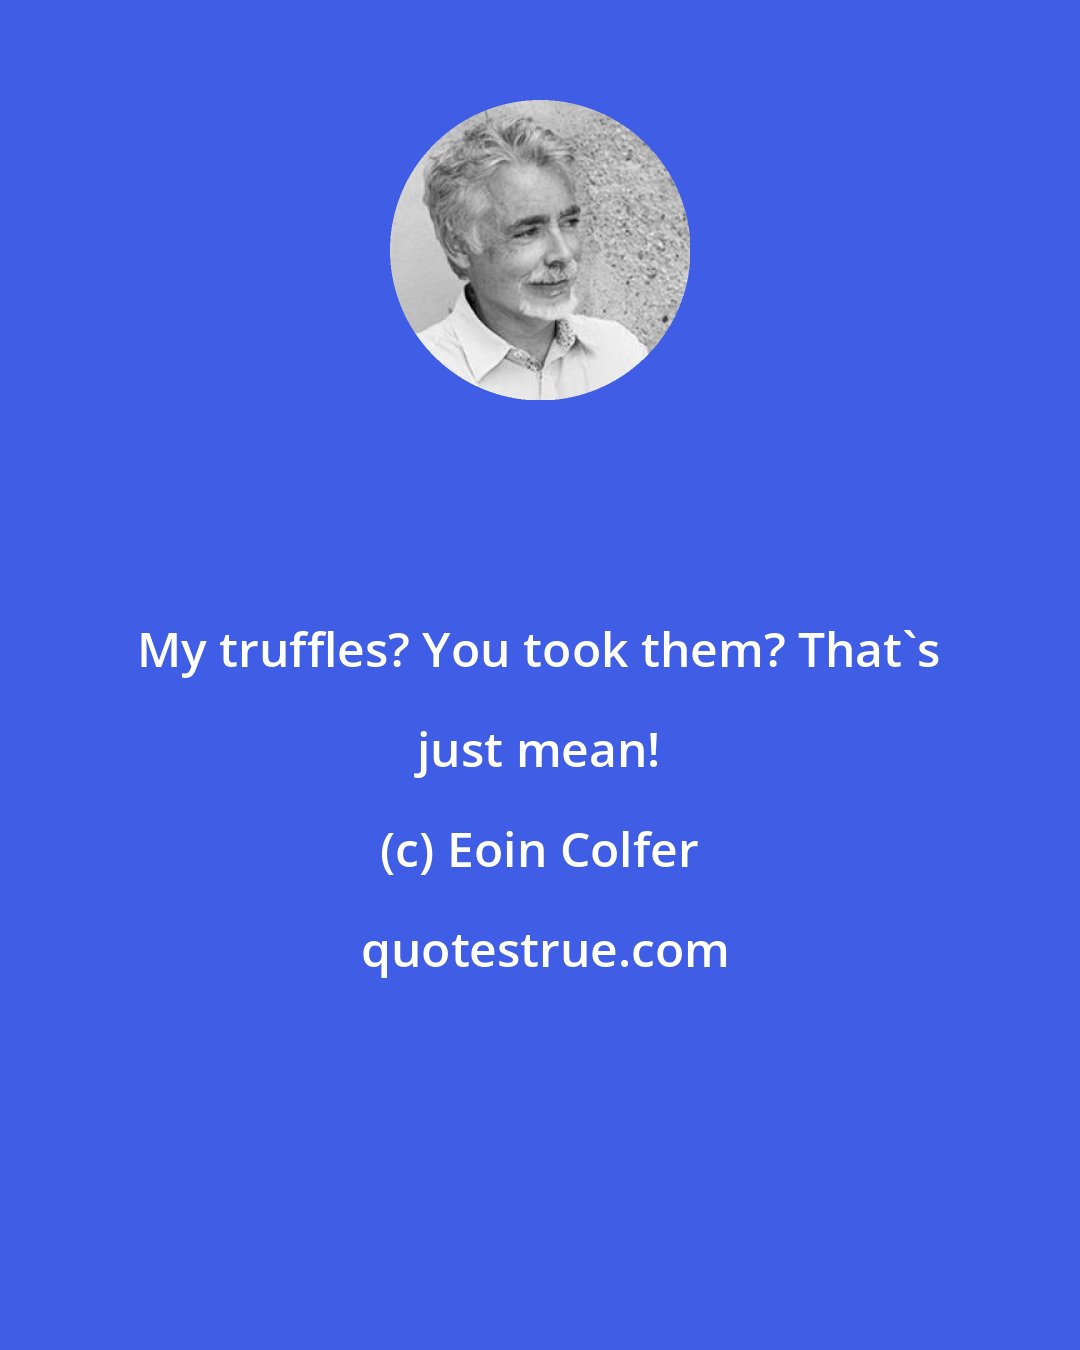 Eoin Colfer: My truffles? You took them? That's just mean!